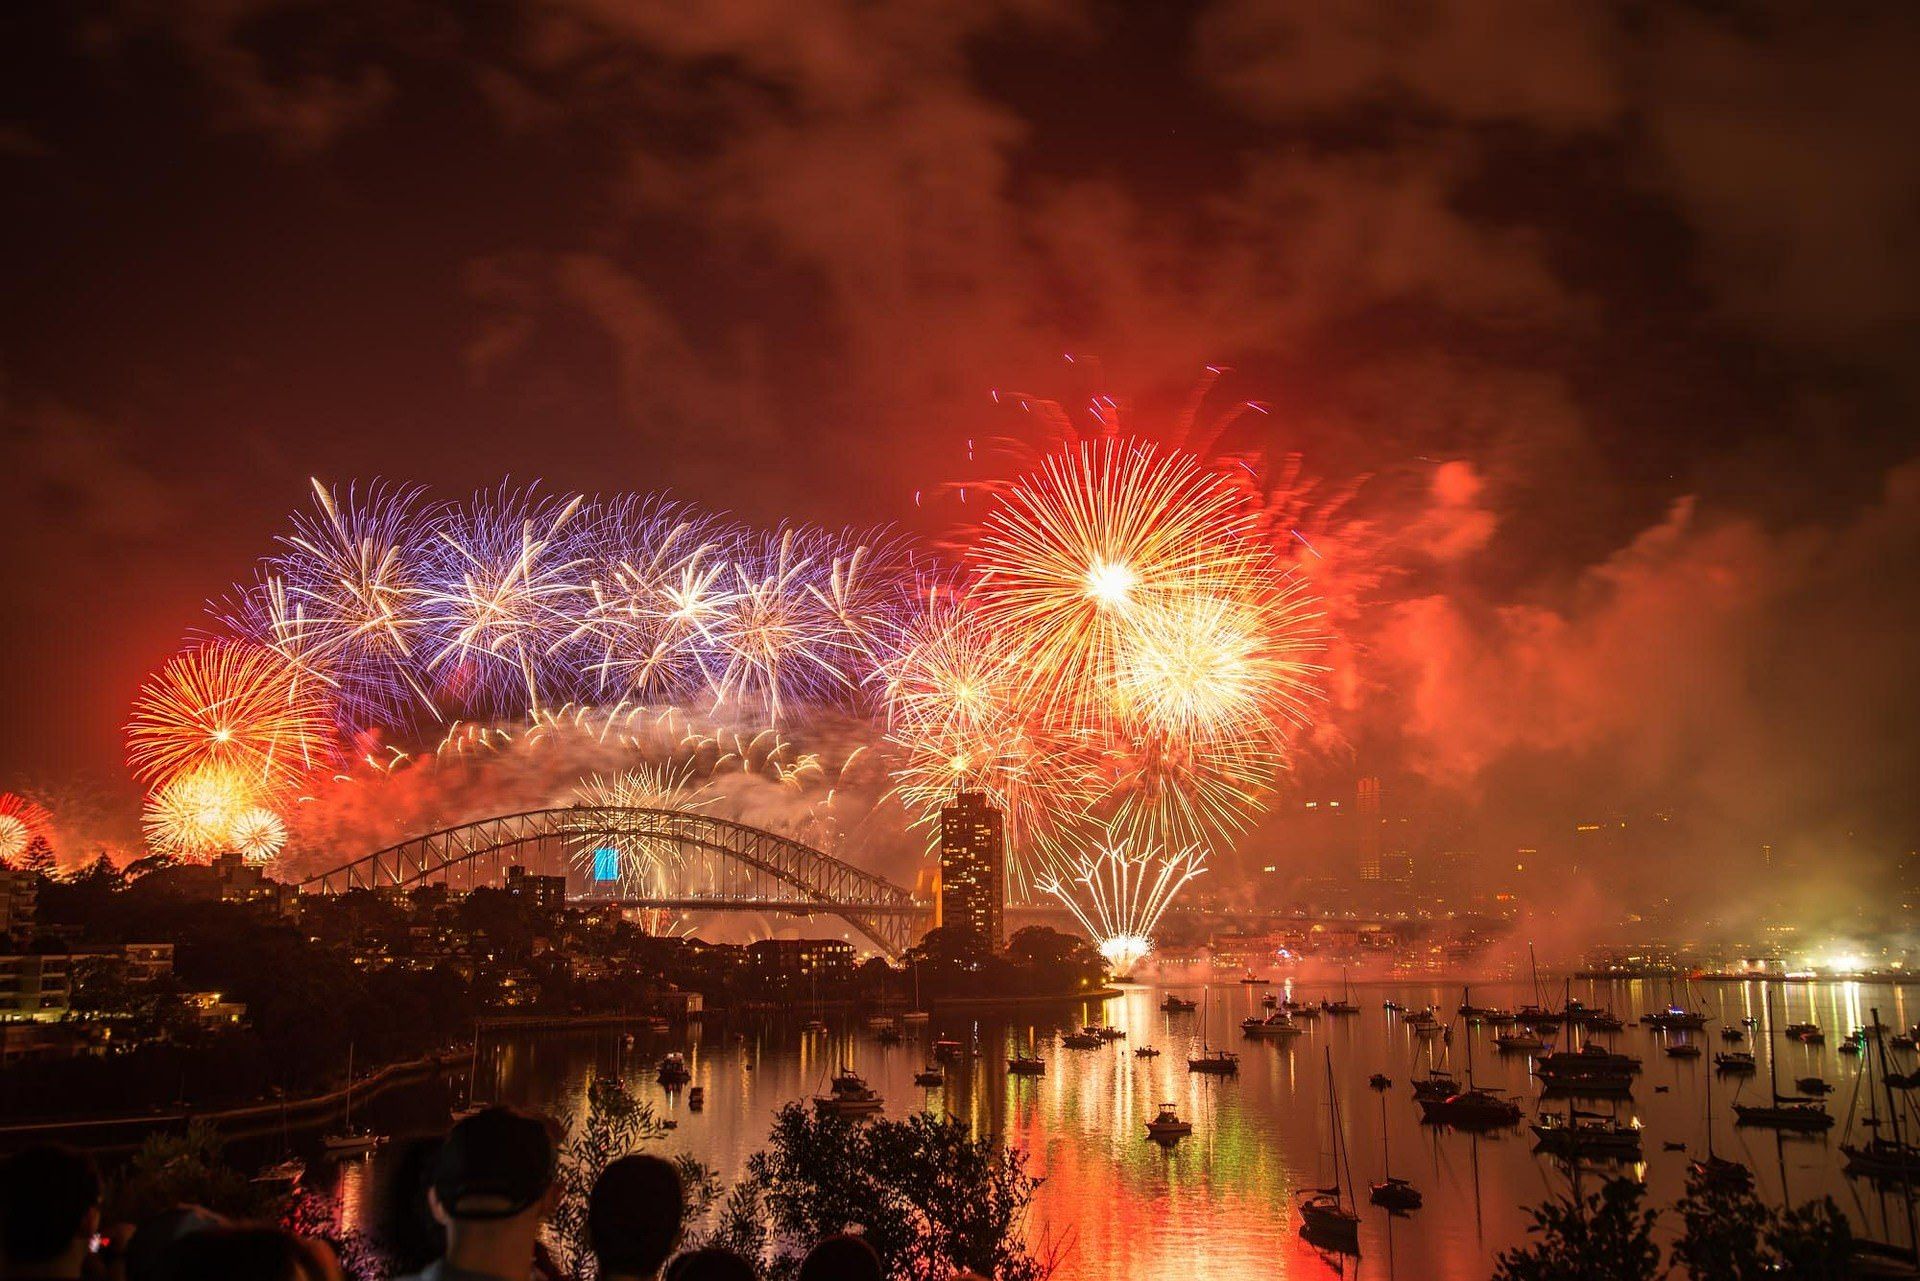 Sydney Harbour Bridge with fireworks at New Year